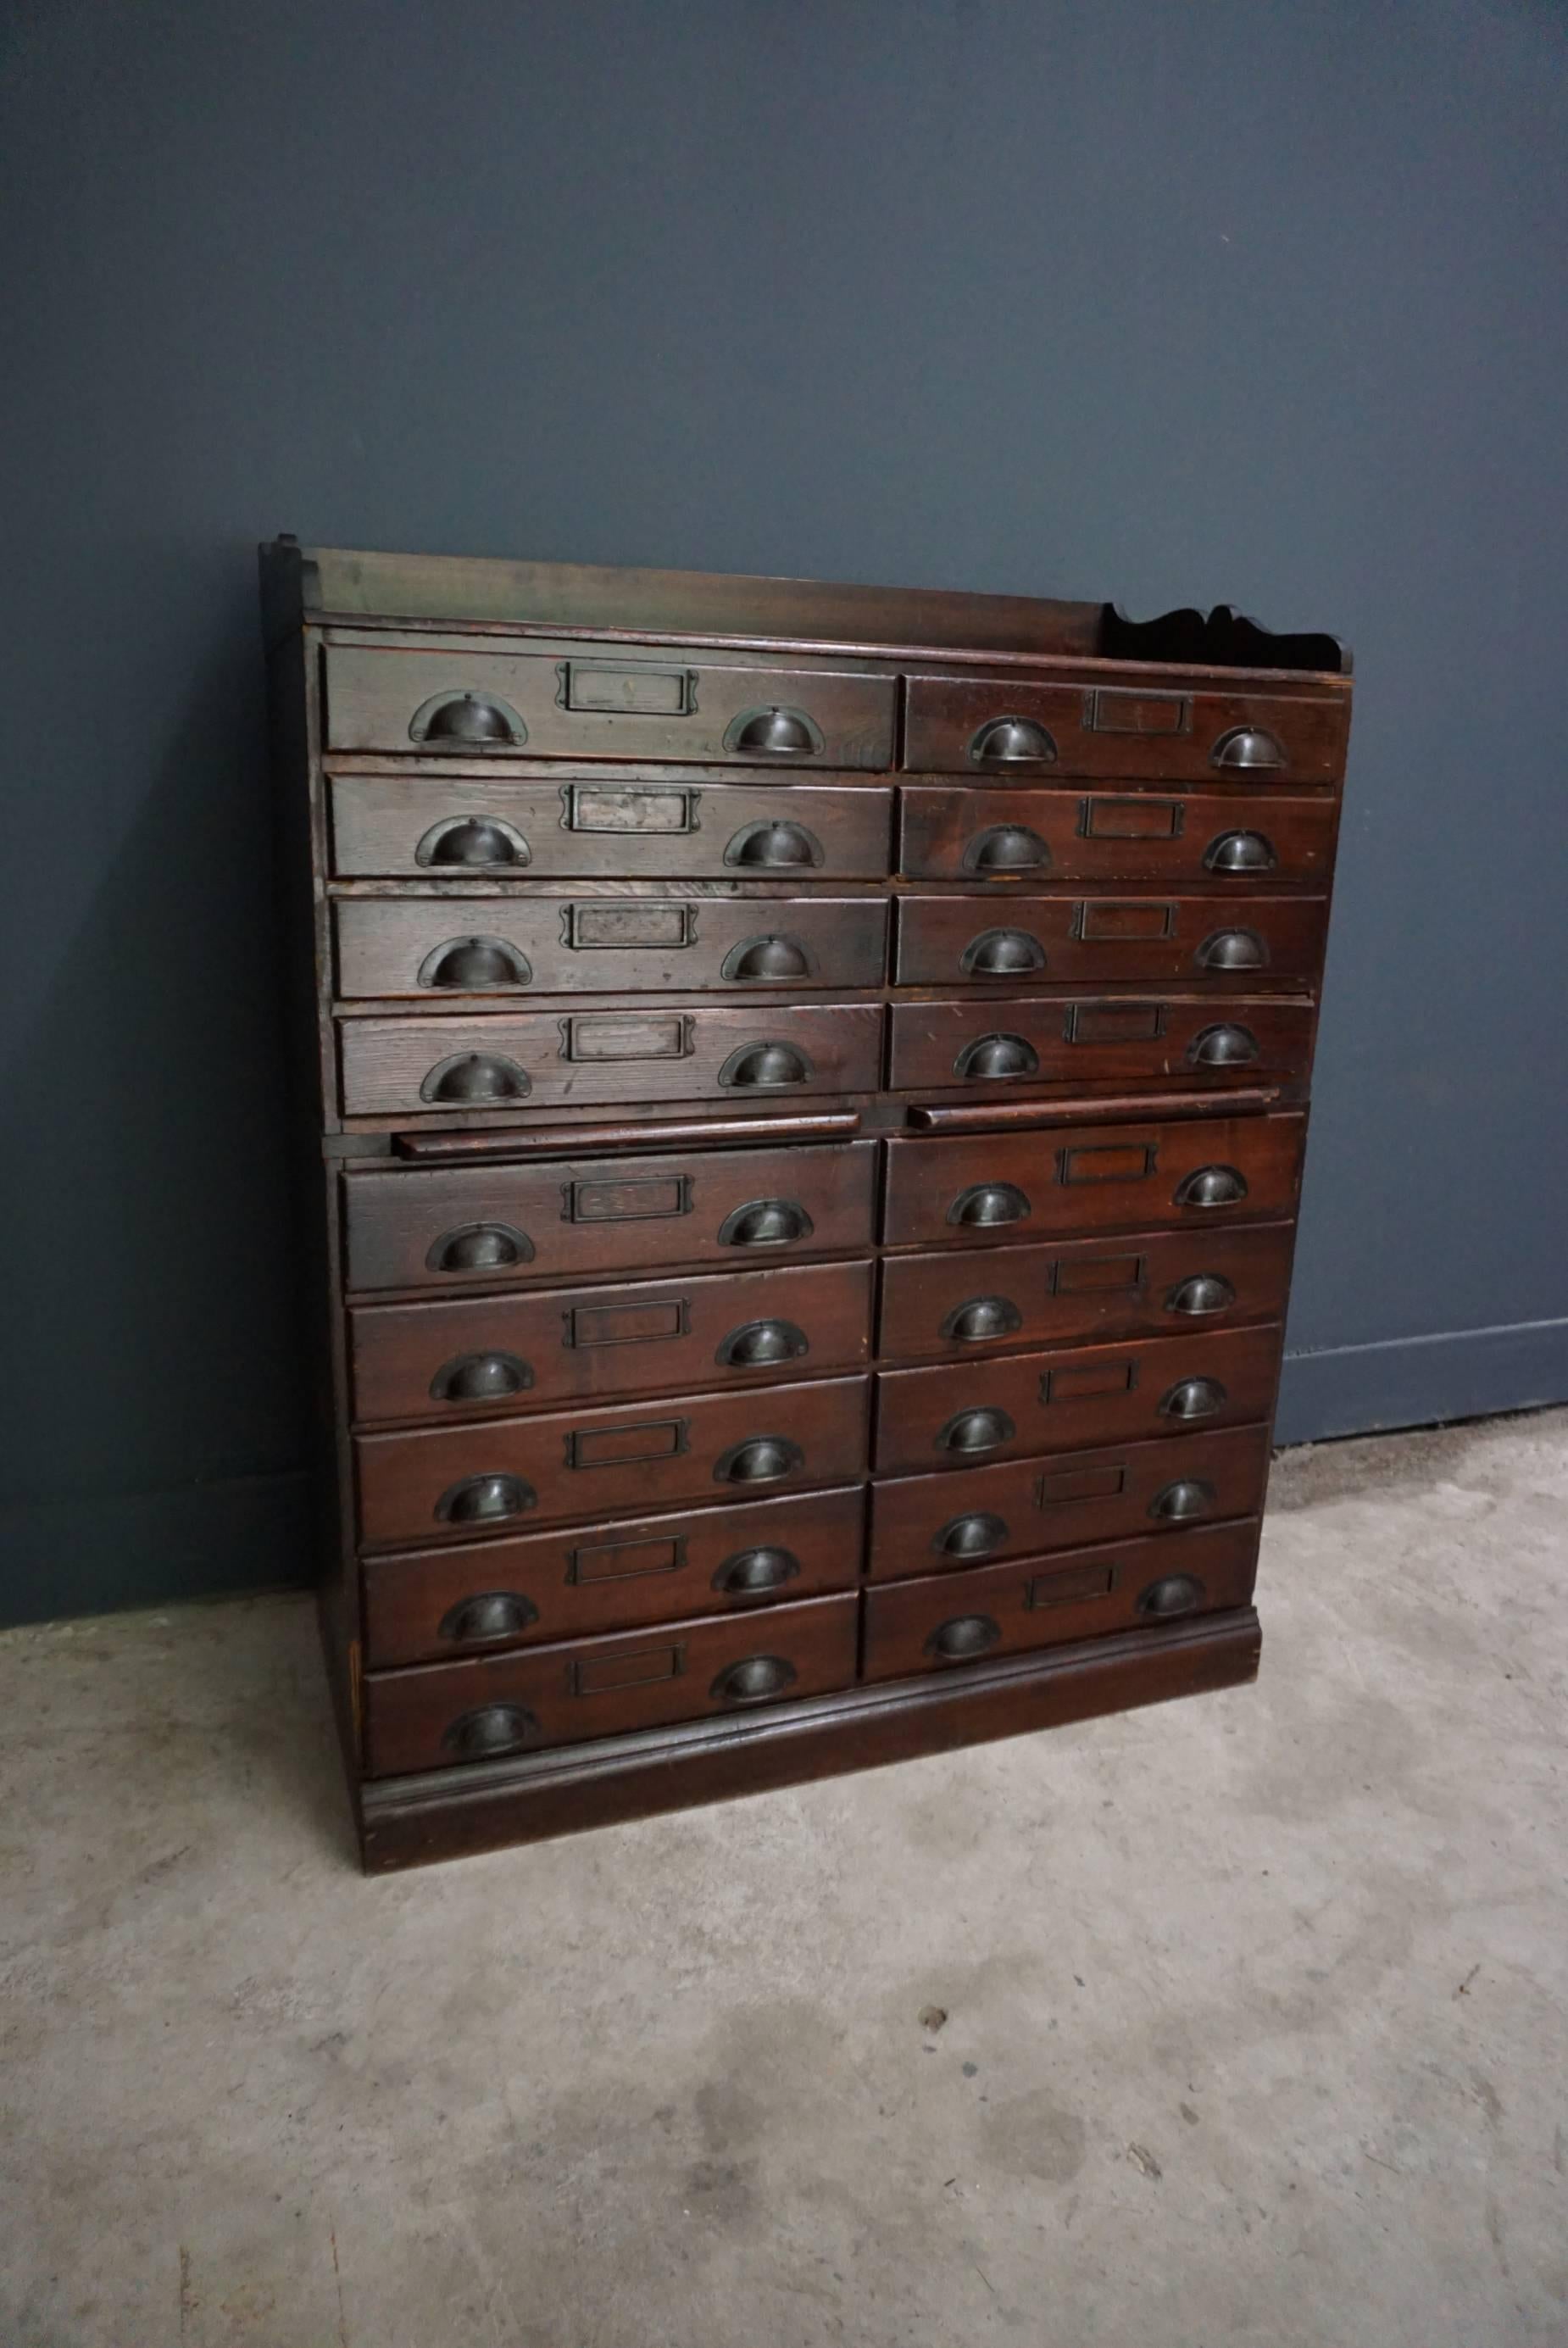 This pine apothecary cabinet was designed and made circa 1950 in Germany. It features 18 drawers with metal hardware and remains in a very good vintage condition. The cabinet is assembled from stackable units and was used in a jewelers store to